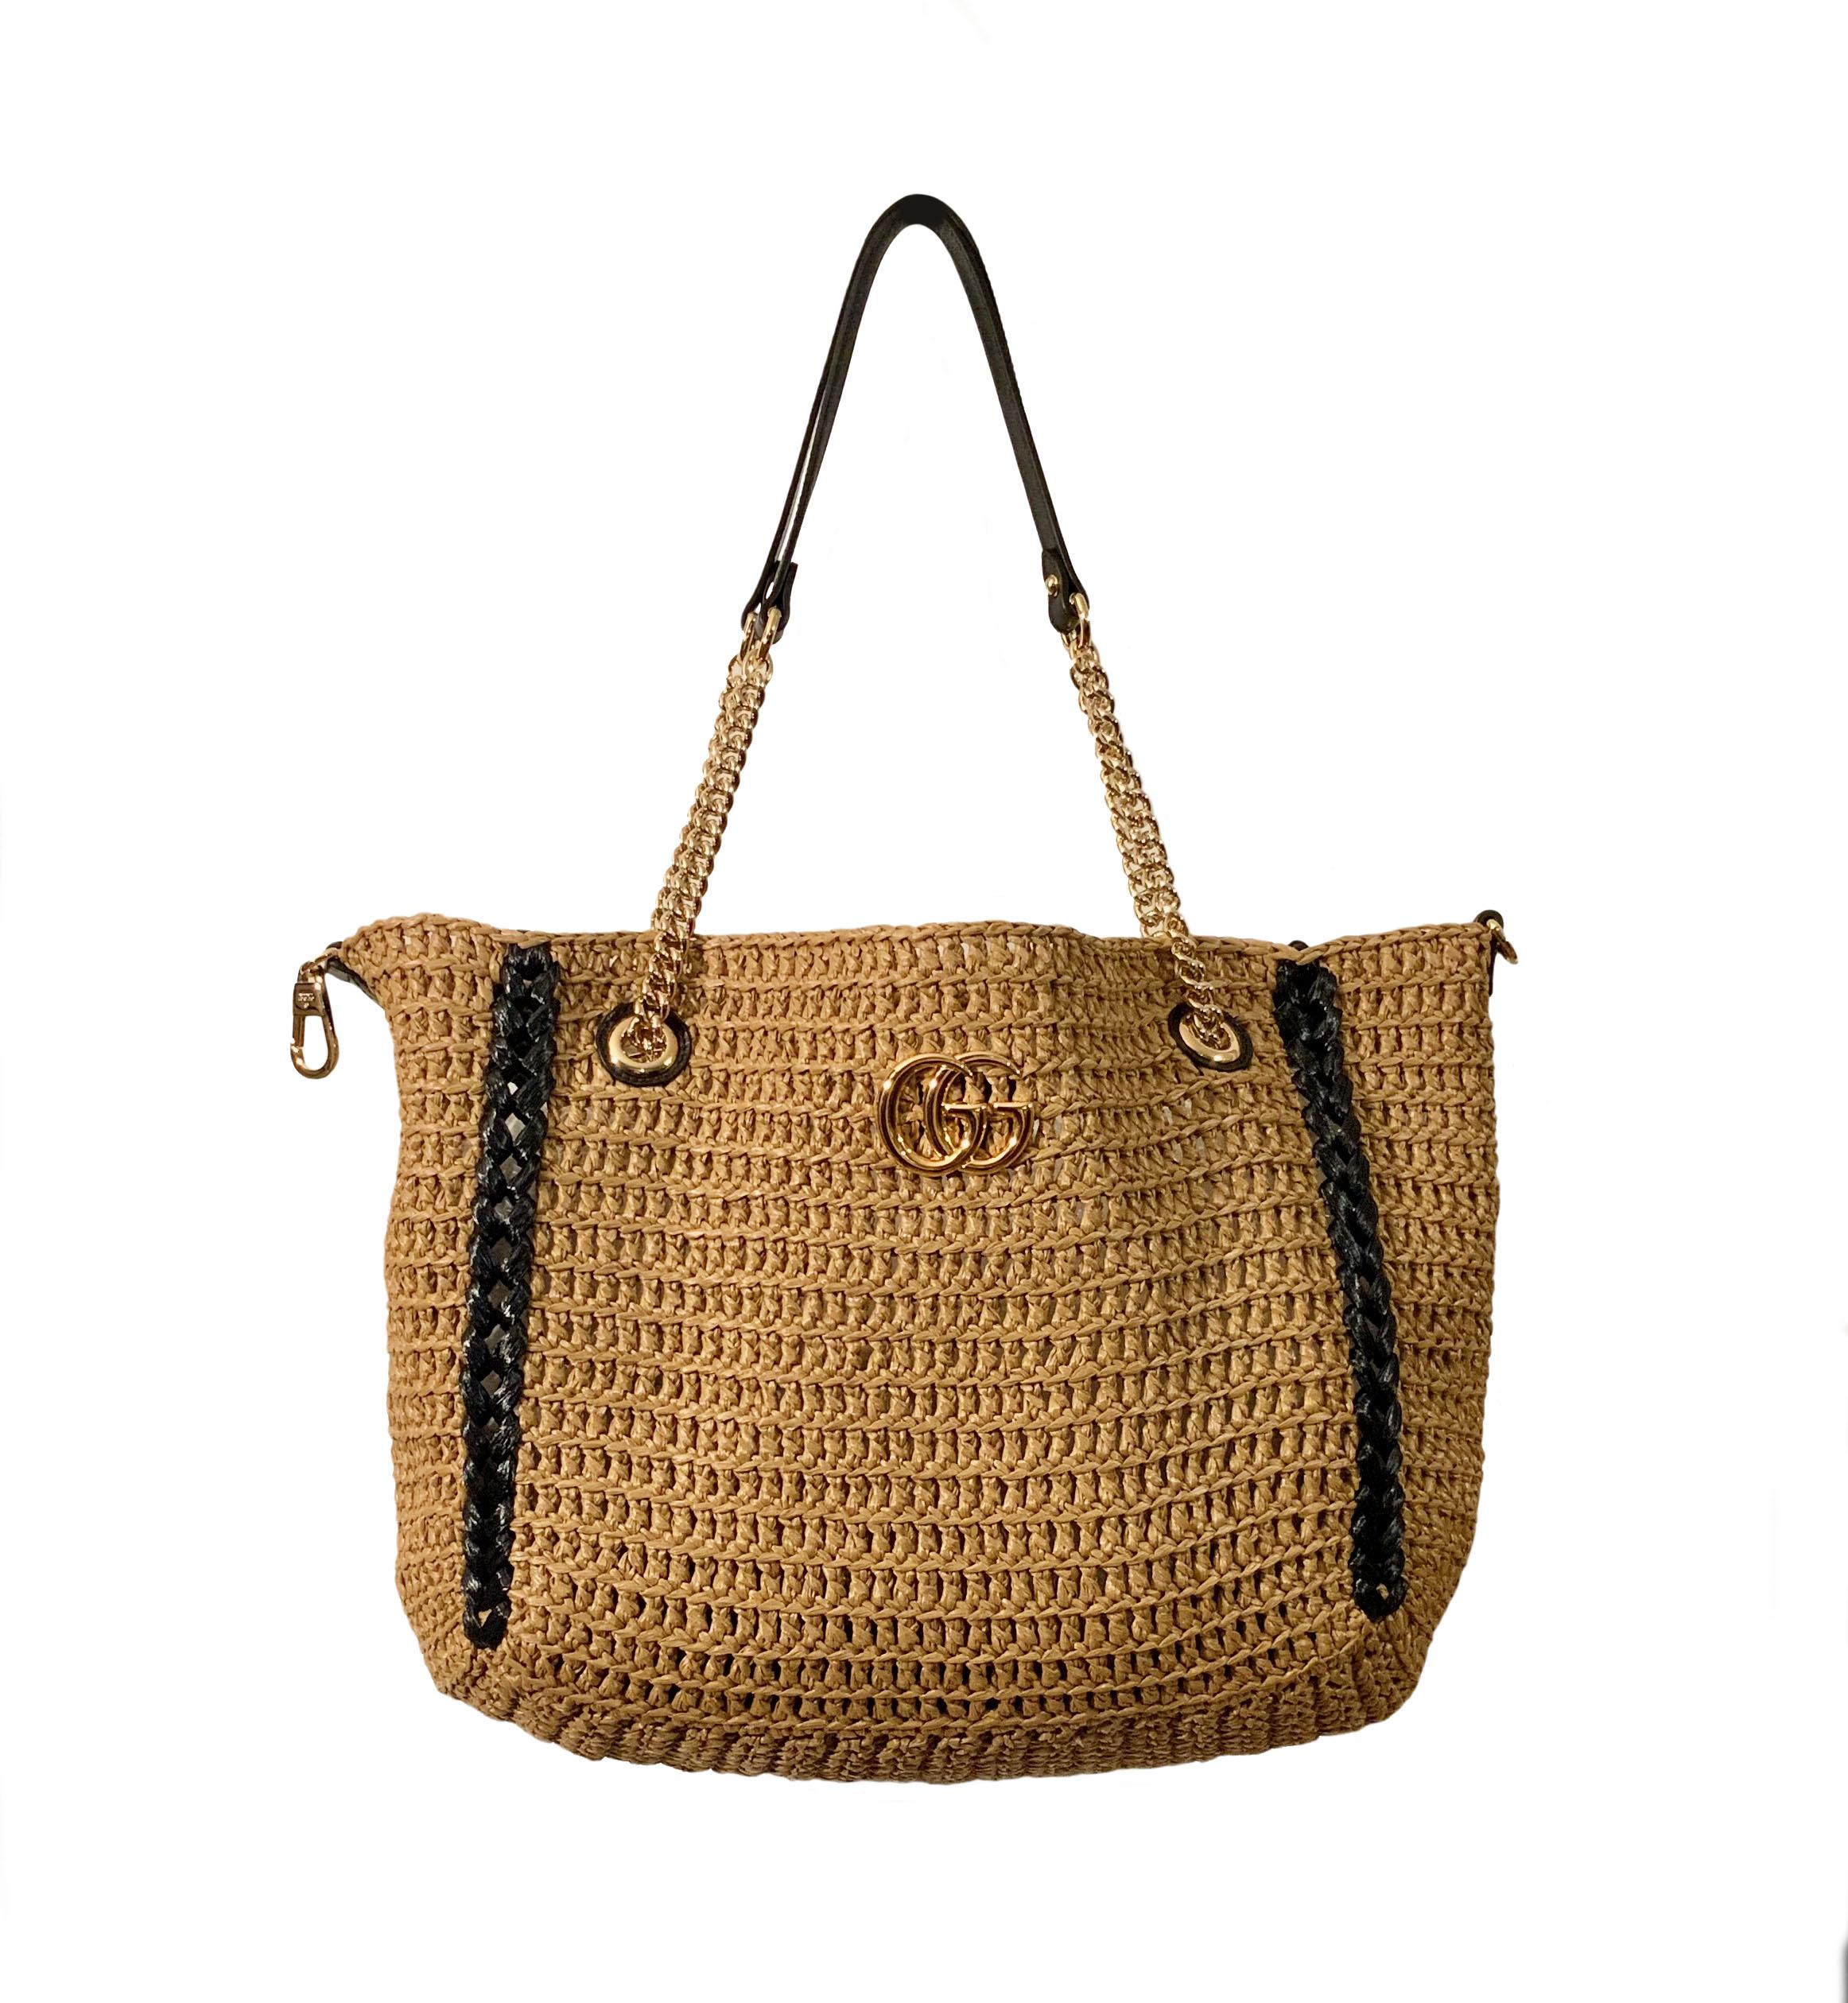 This new pre-owned Large GG Marmont Gucci tote bag is crafted of woven straw with a raffia effect. 
Black stripes running down on each side and the GG logo in the center.
It features two gold-tone chains with a leather handle as shoulder straps.